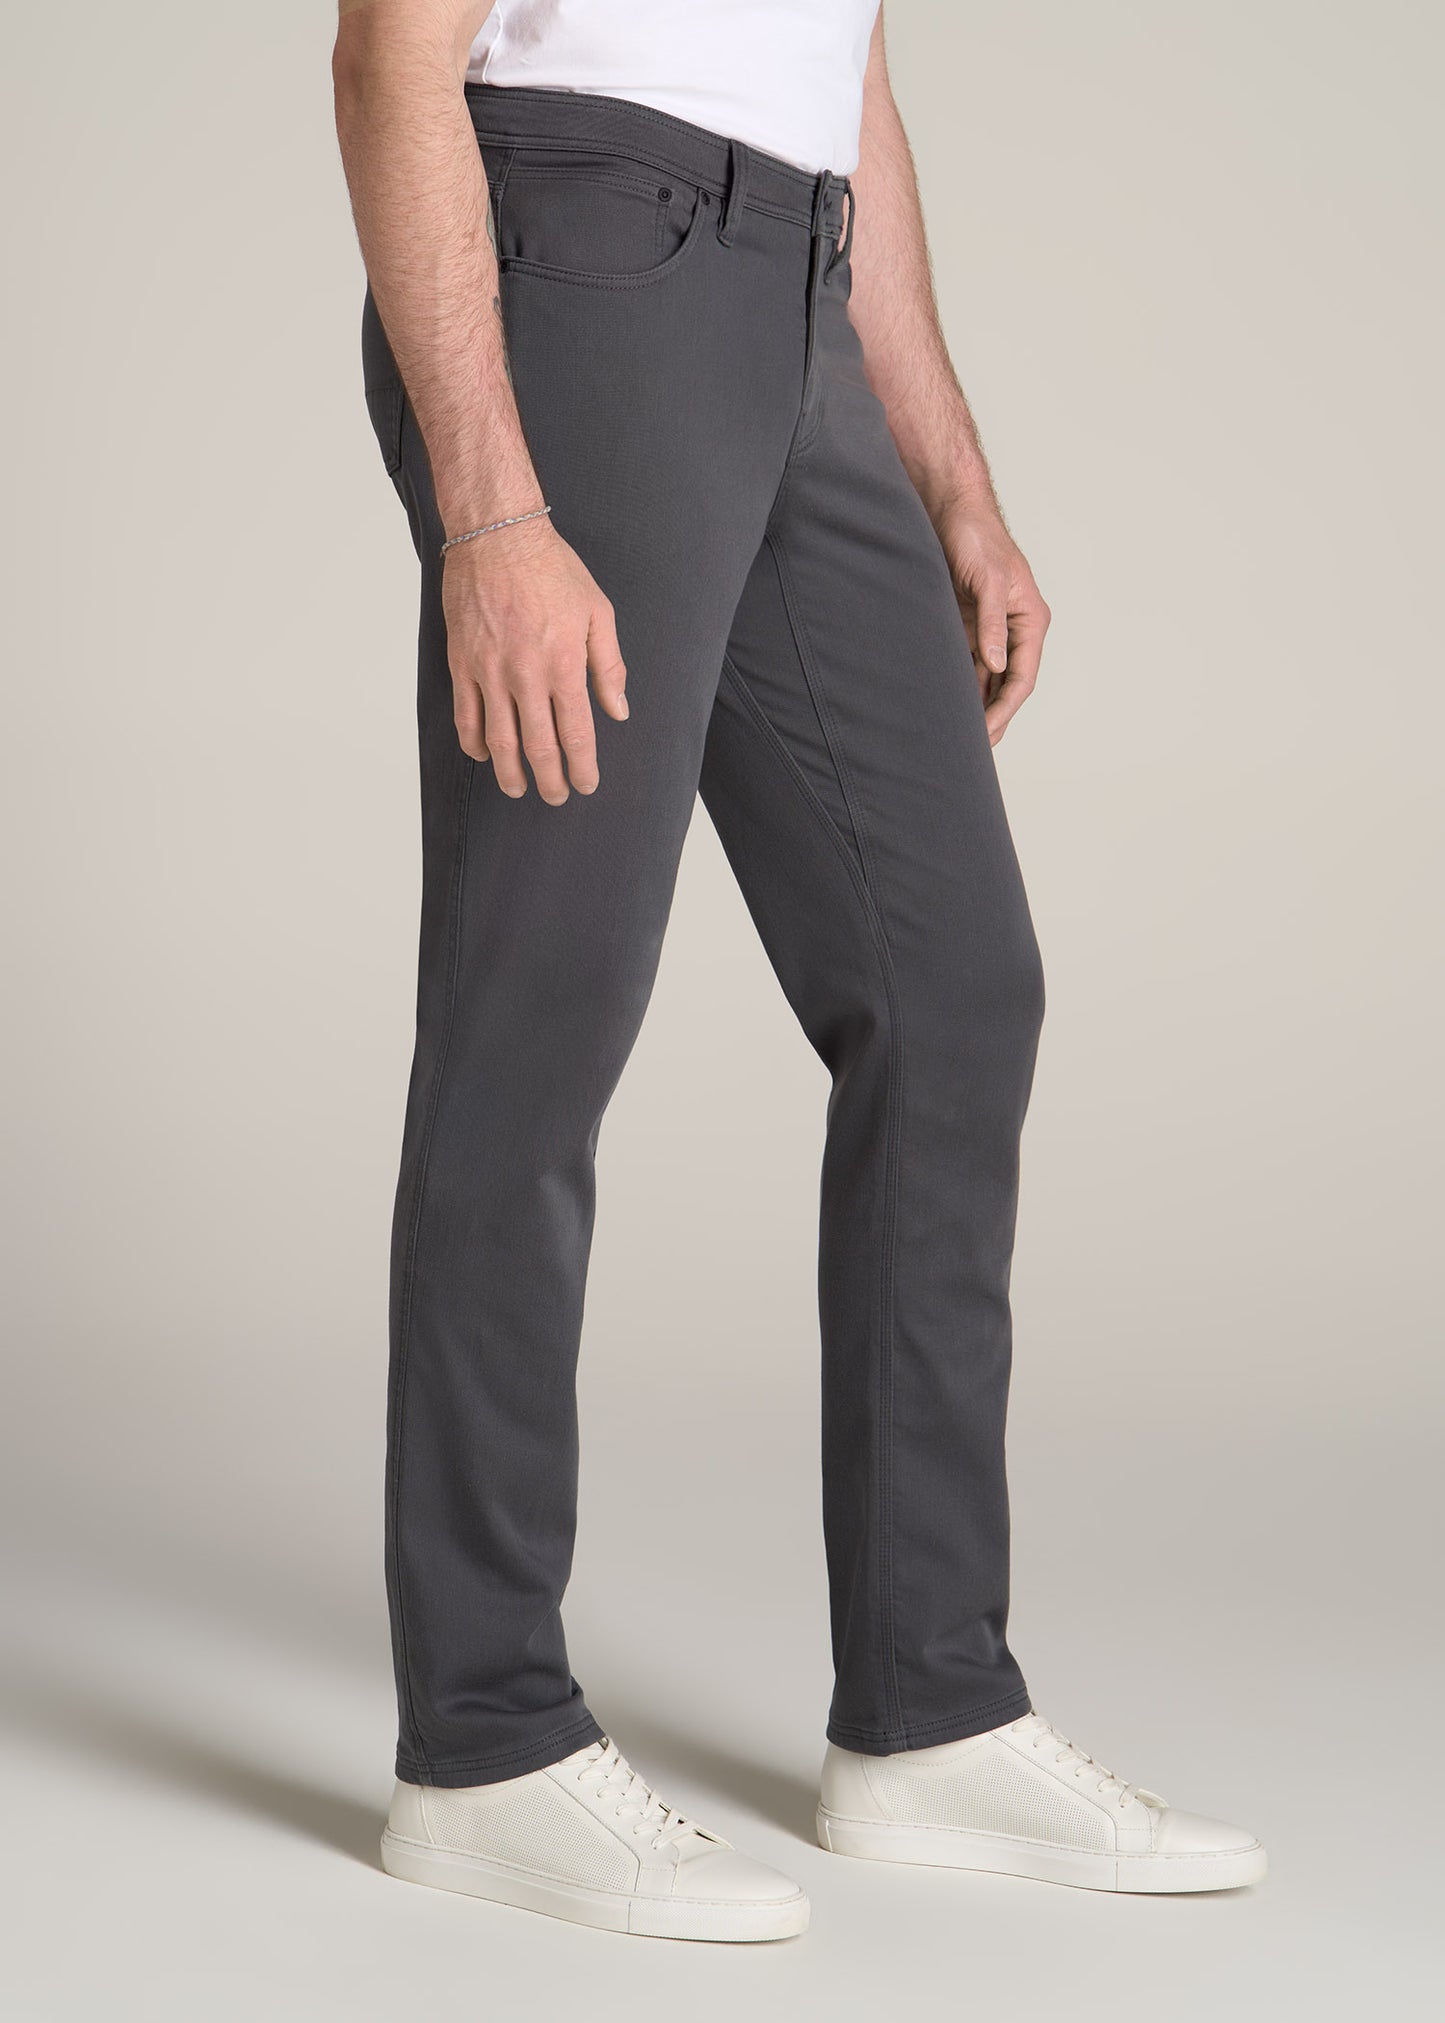 American-Tall-Men-Everyday-Comfort-Five-Pocket-Pant-Iron-Grey-side